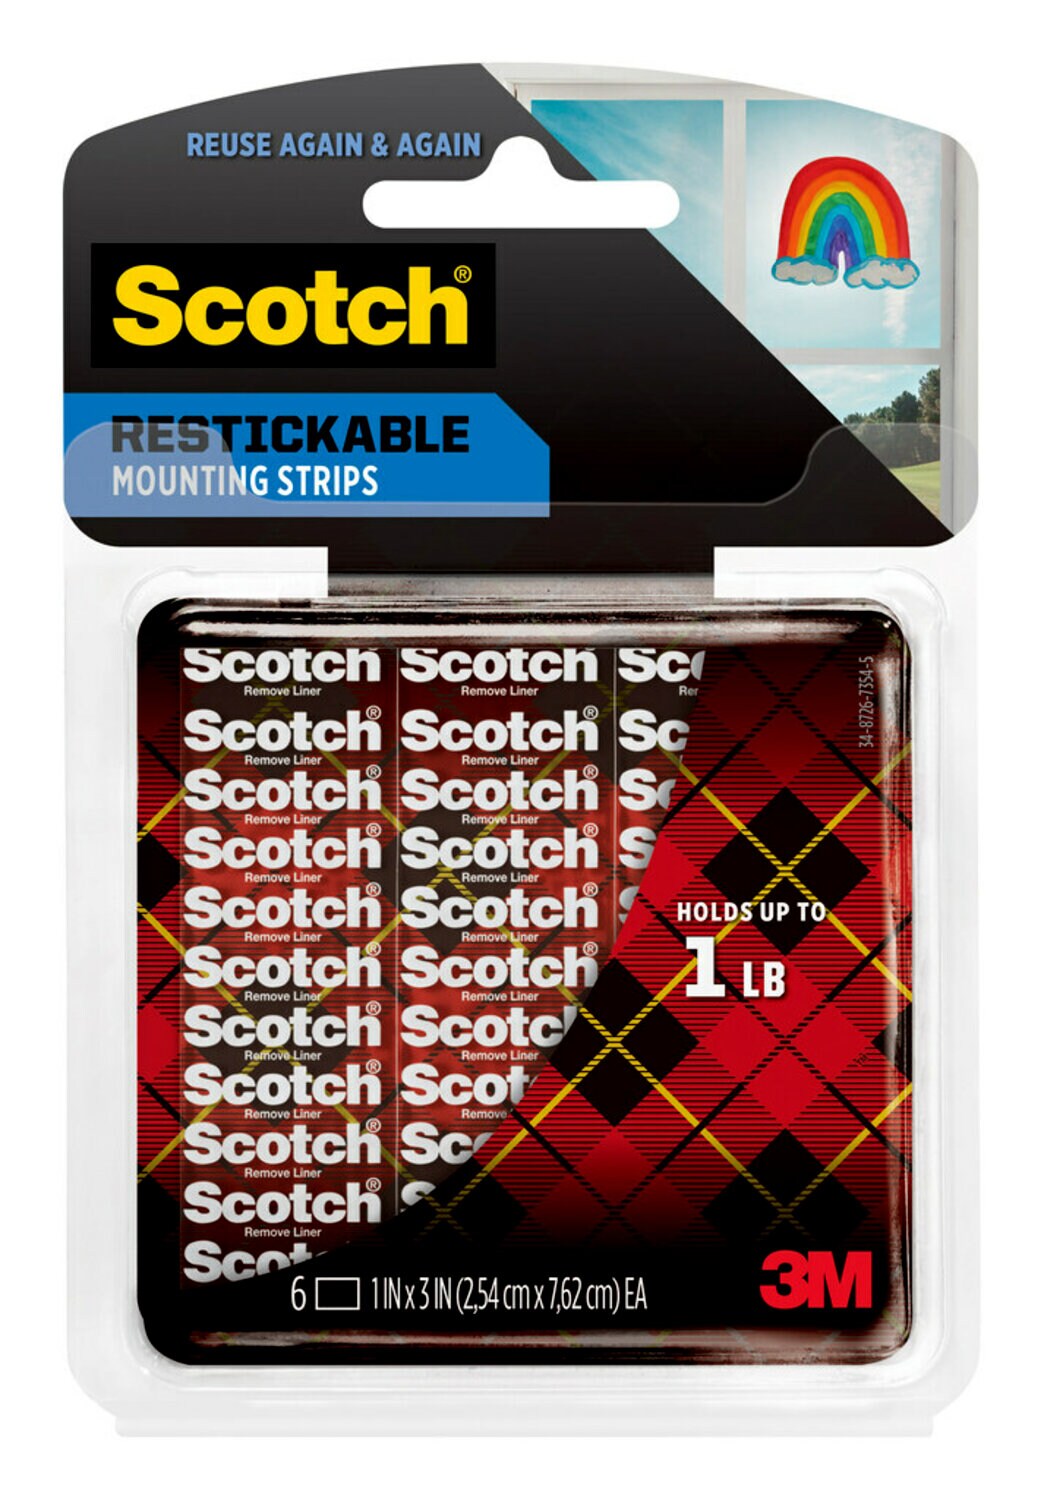 7100245388 - Scotch Restickable Mounting Strips R101S, 1 in x 3 in (2.54 cm x 7.62 cm) 6/pk